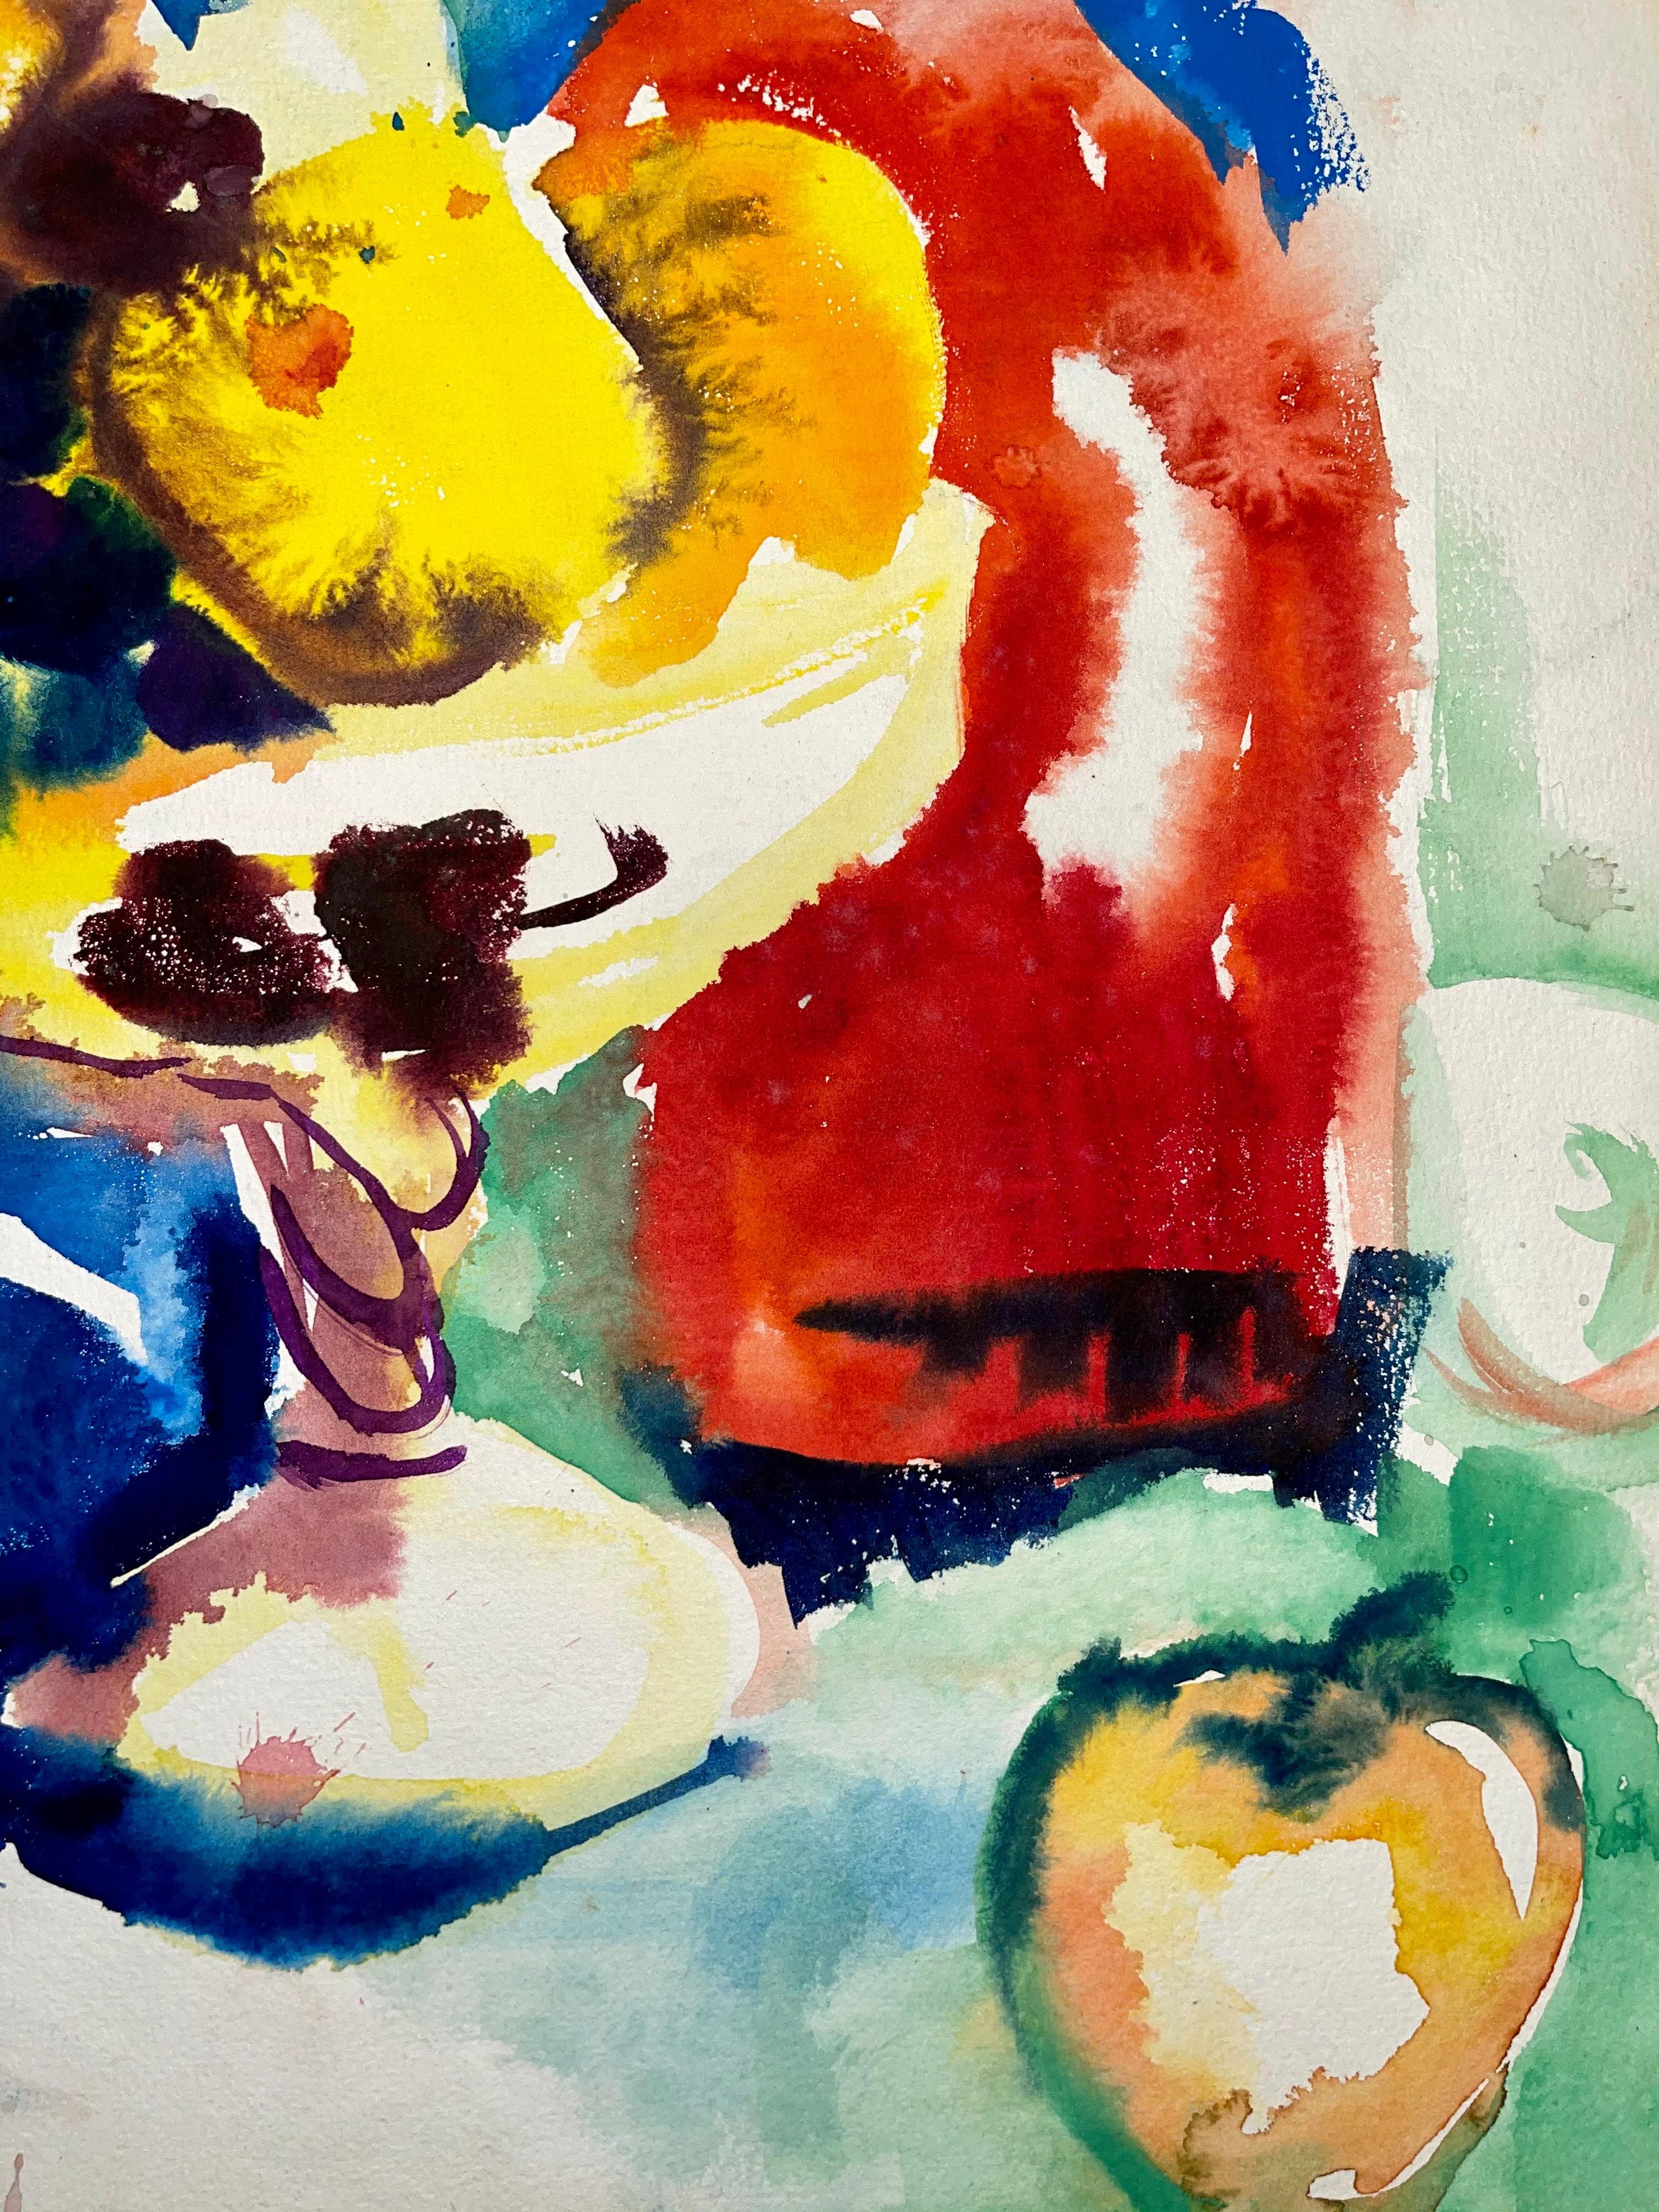 Artist: Ian Hornak (1944-2002)
Title: Untitled (Abstract Still Life with Flowers, Fruit and Bottle)
Year: 1963
Medium: Watercolor on heavy archival paper
Size: 29.5 x 21 inches
Condition: Good
Provenance: Estate of Ian Hornak, East Hampton,